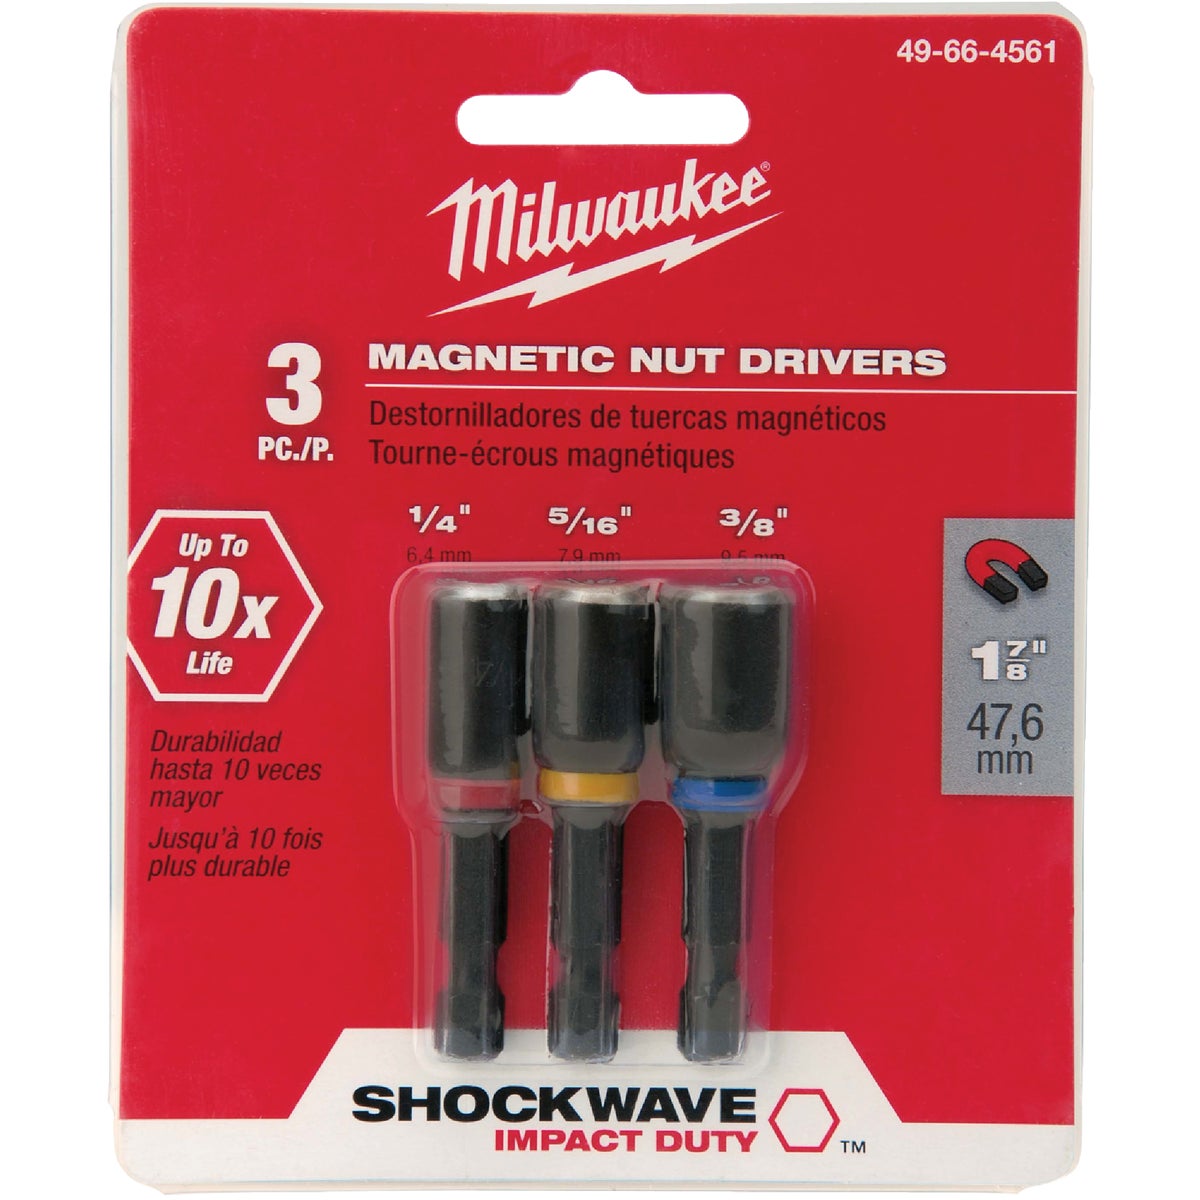 Item 355868, Milwaukee Shockwave Impact Duty magnetic nut drivers are engineered for 